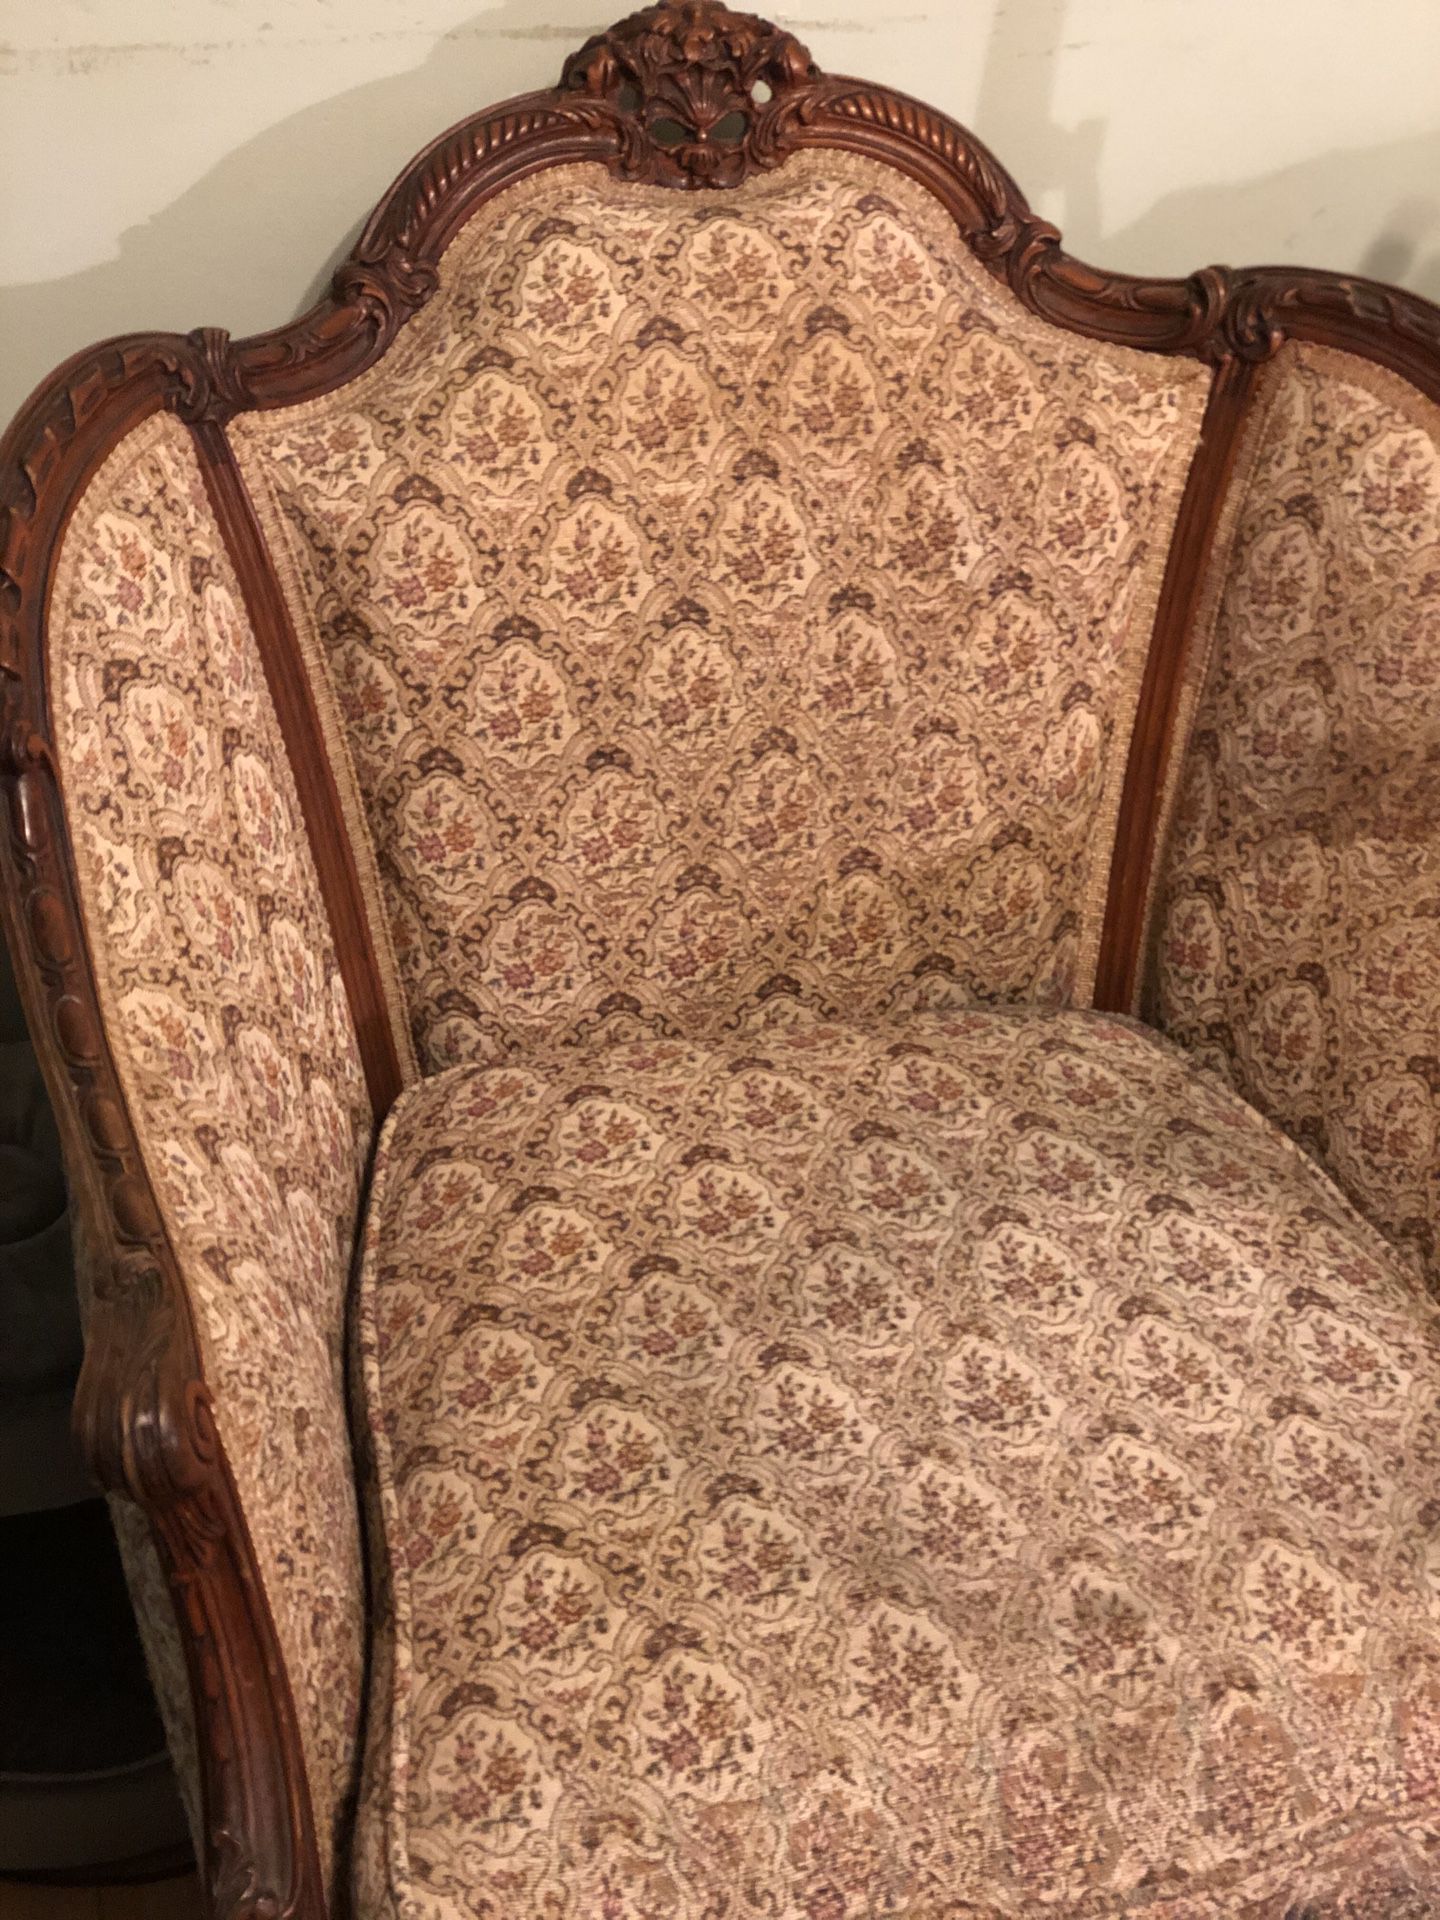 Vintage VICTORIAN STYLE CARVED WOOD chair / SOFA Couch